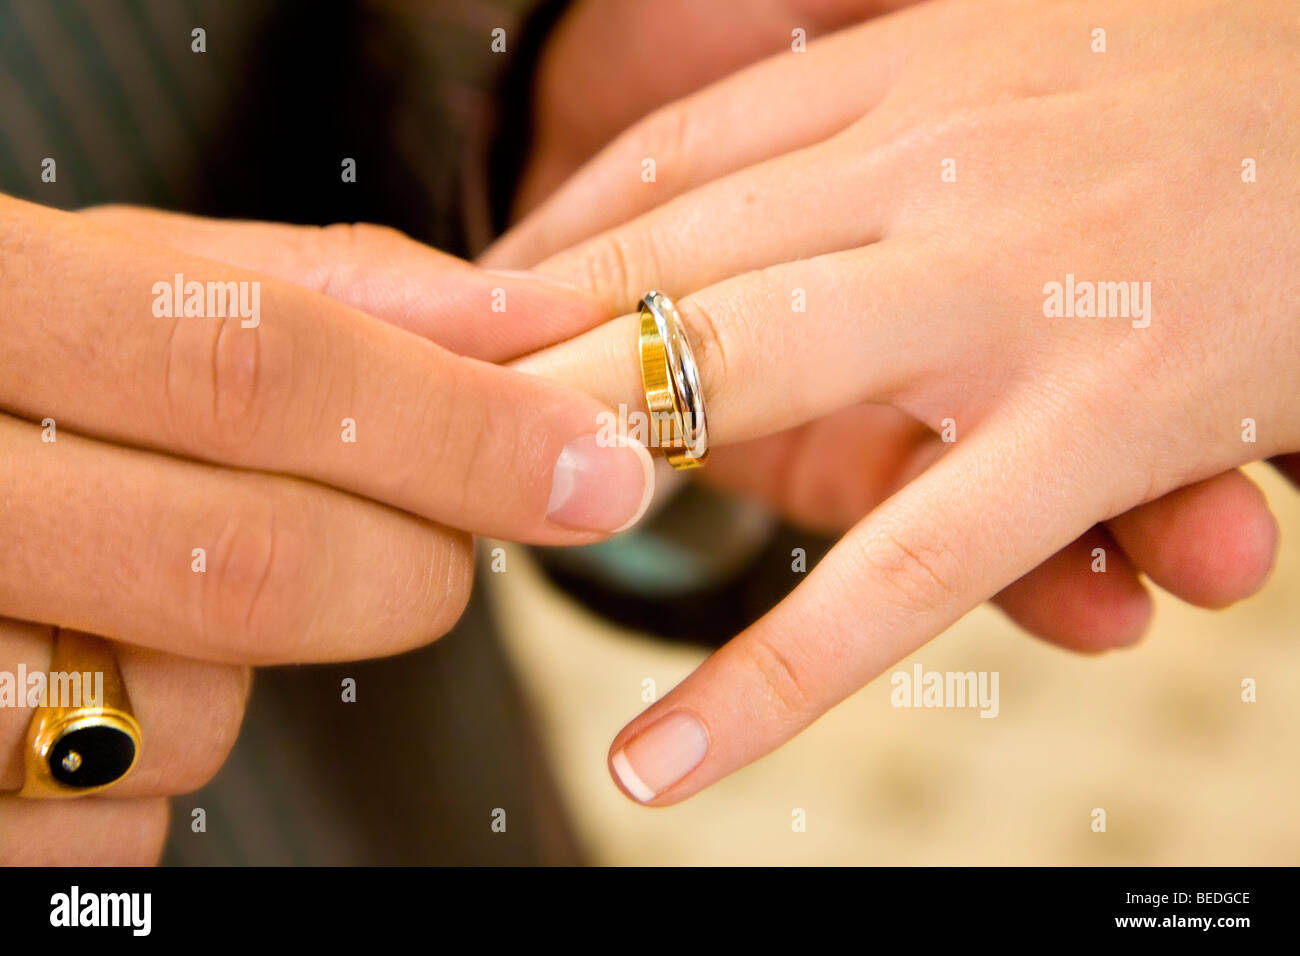 Why do we have wedding rings? - Fiona Kelly Photography